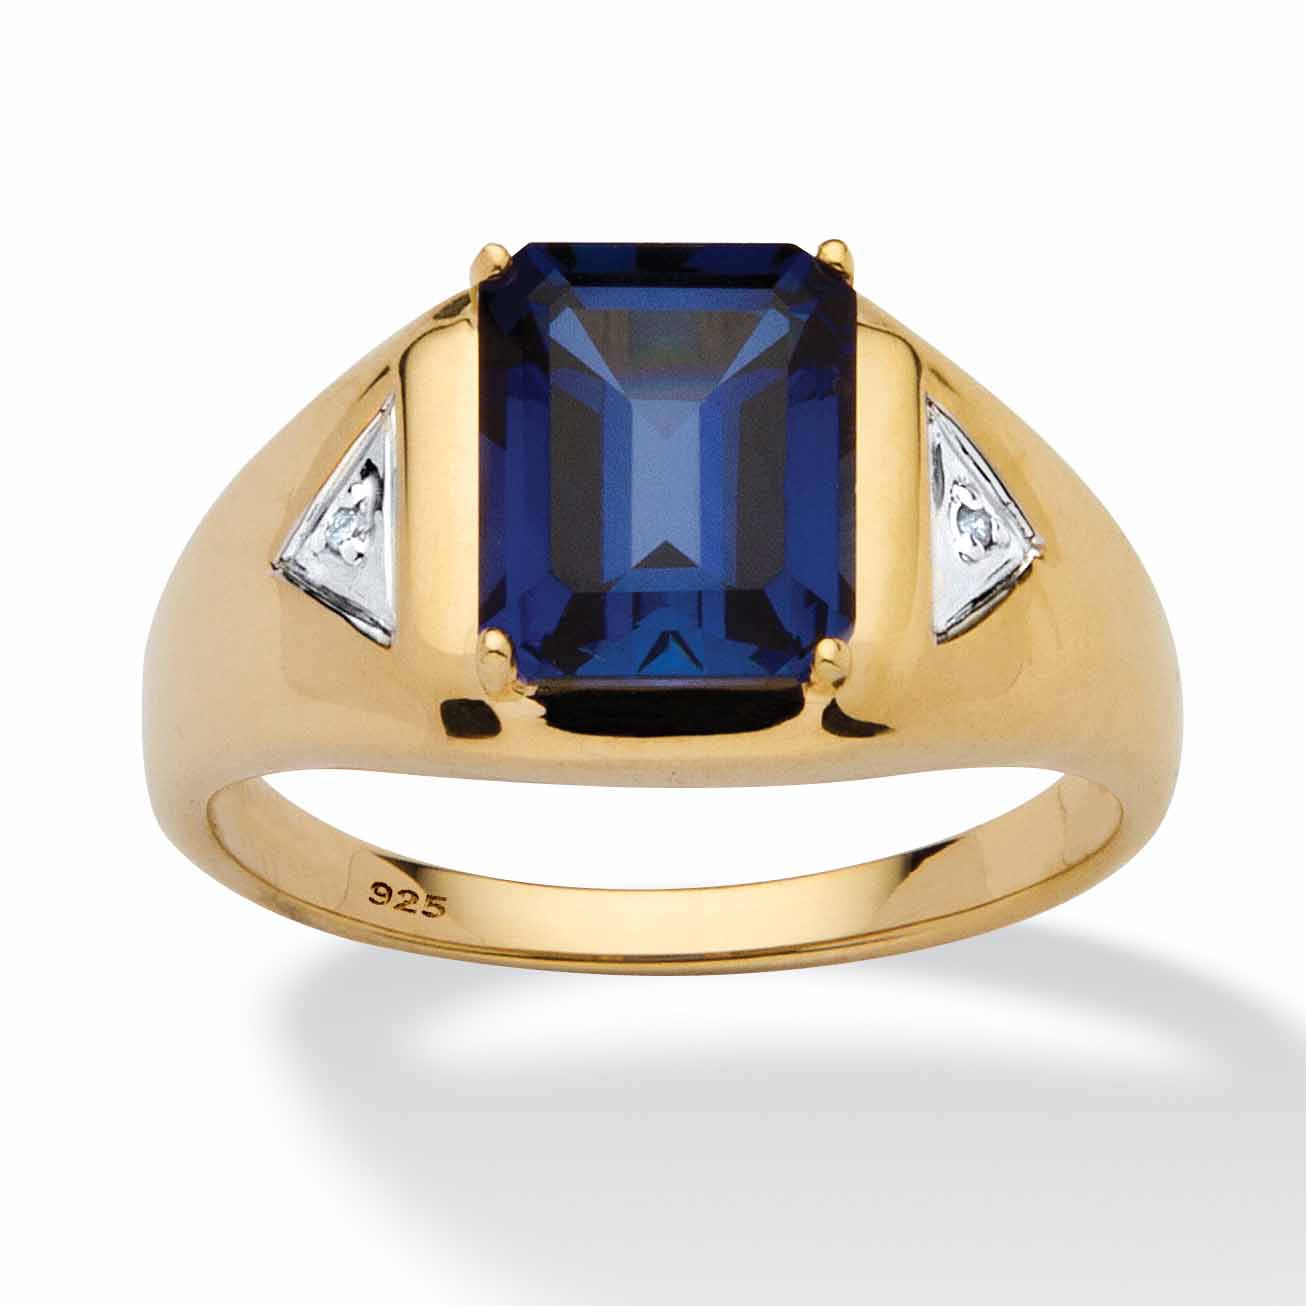 Men's 2.75 TCW Emerald-Cut Created Sapphire Ring in 18k Gold over ...